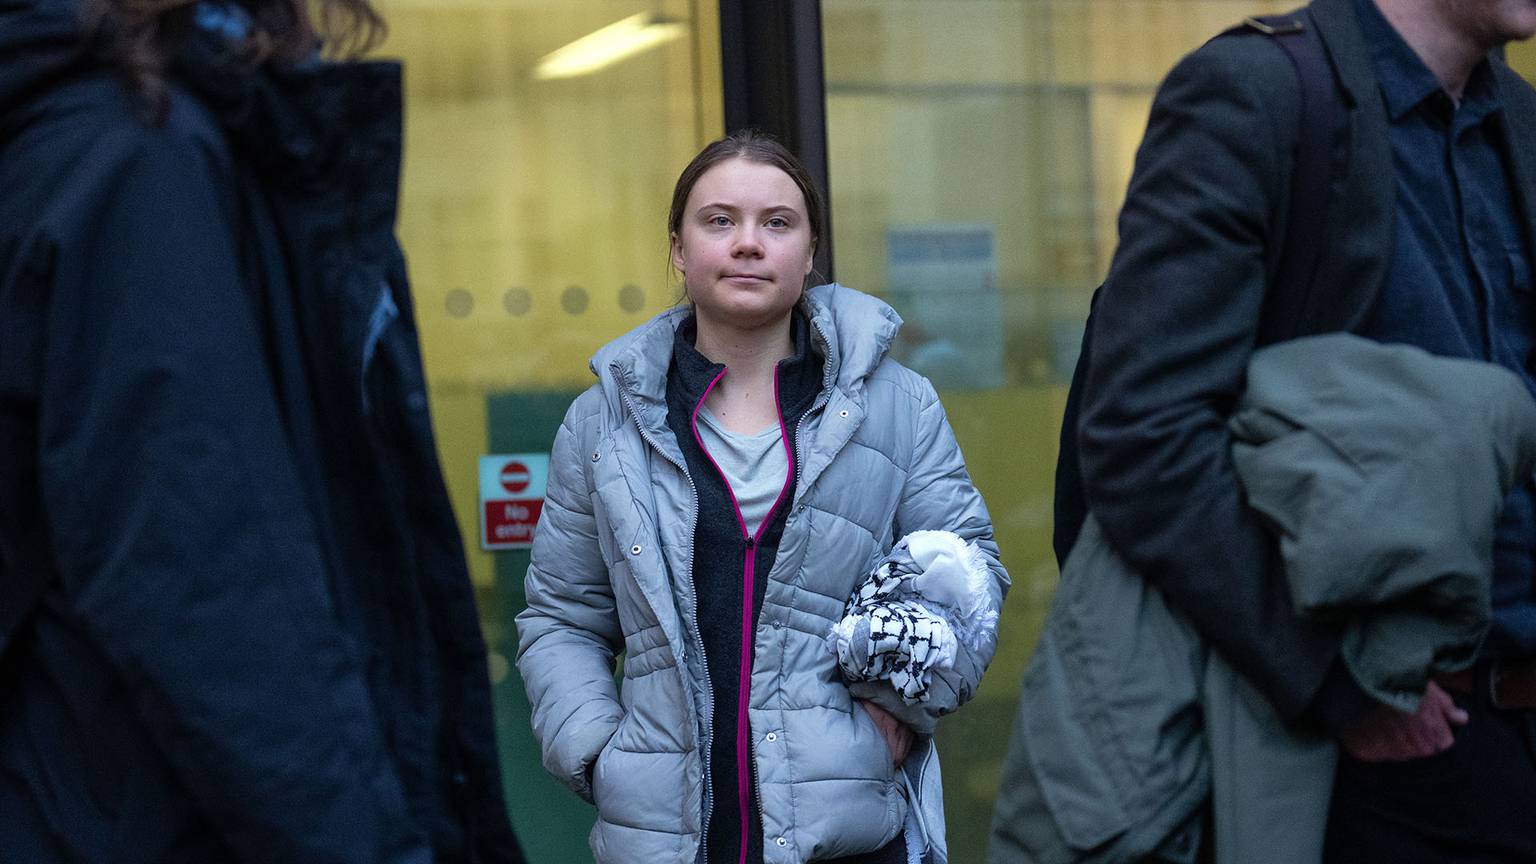 Video: Judge acquits Greta Thunberg over protest at oil industry conference [Video]